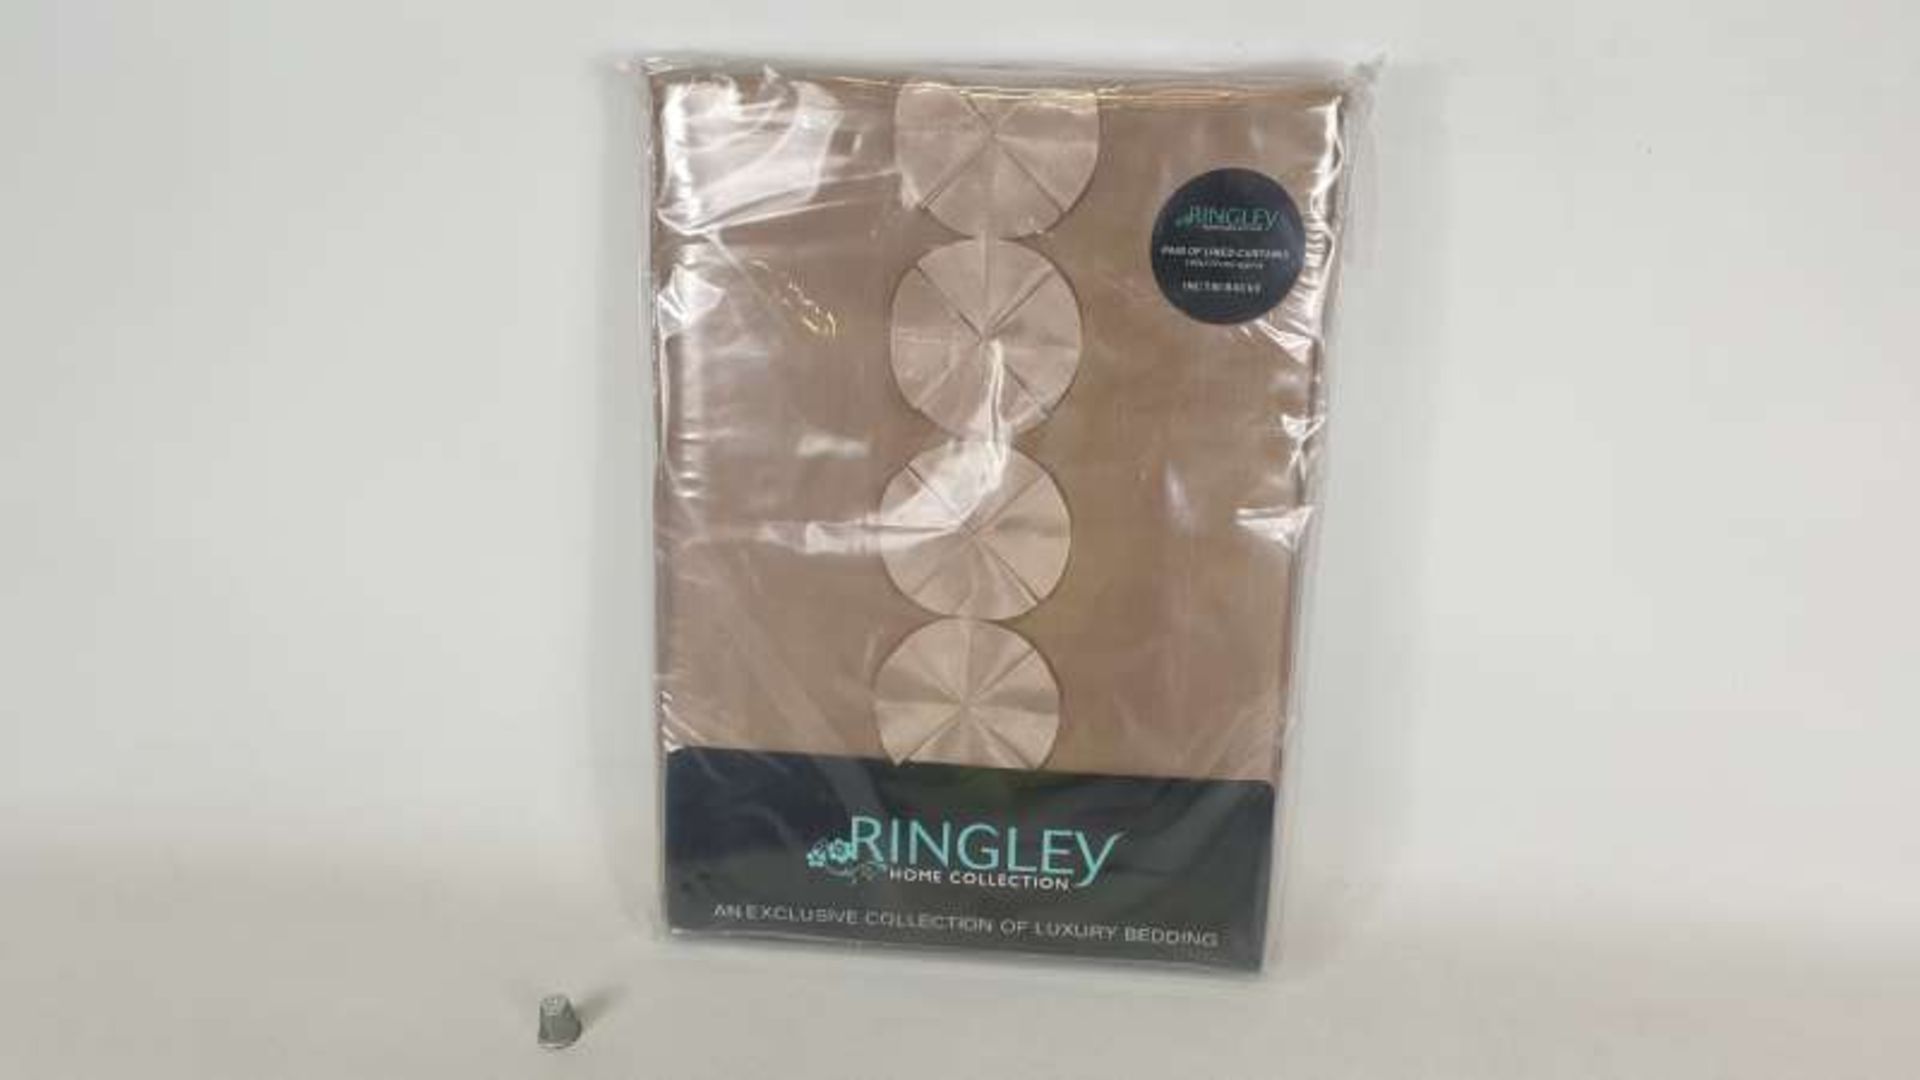 18 X BRAND NEW PAIRS OF RINGLEY CURTAINS WITH TIE BACKS SIZE 168 X 137 CM IN 2 BOXES